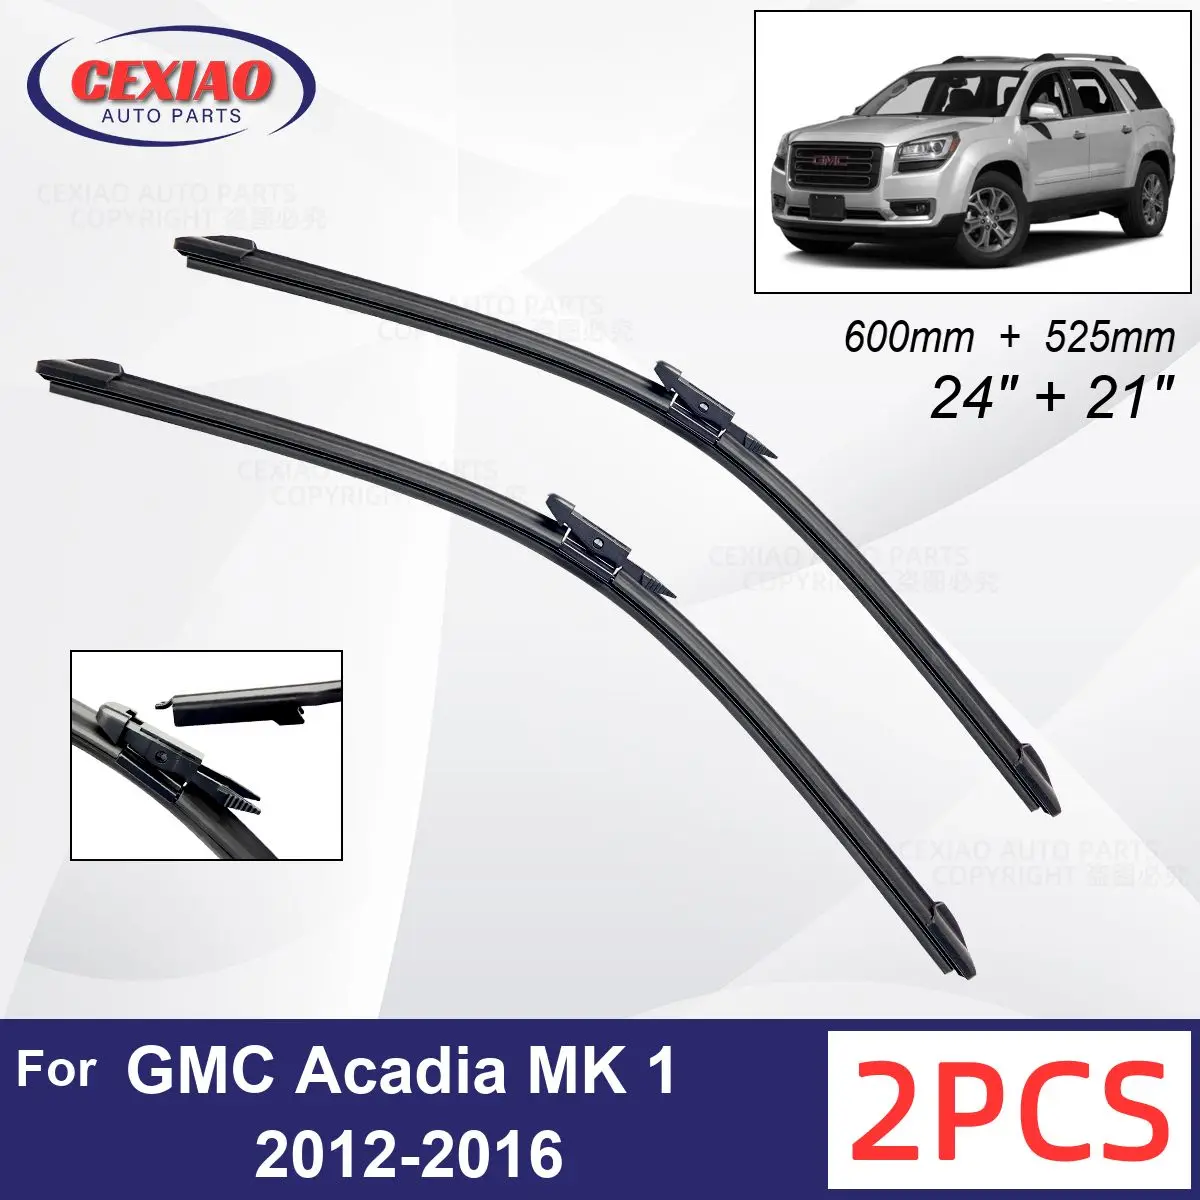 

Car Wiper For GMC Acadia MK 1 2012-2016 Front Wiper Blades Soft Rubber Windscreen Wipers Auto Windshield 24" 21" 600mm 525mm